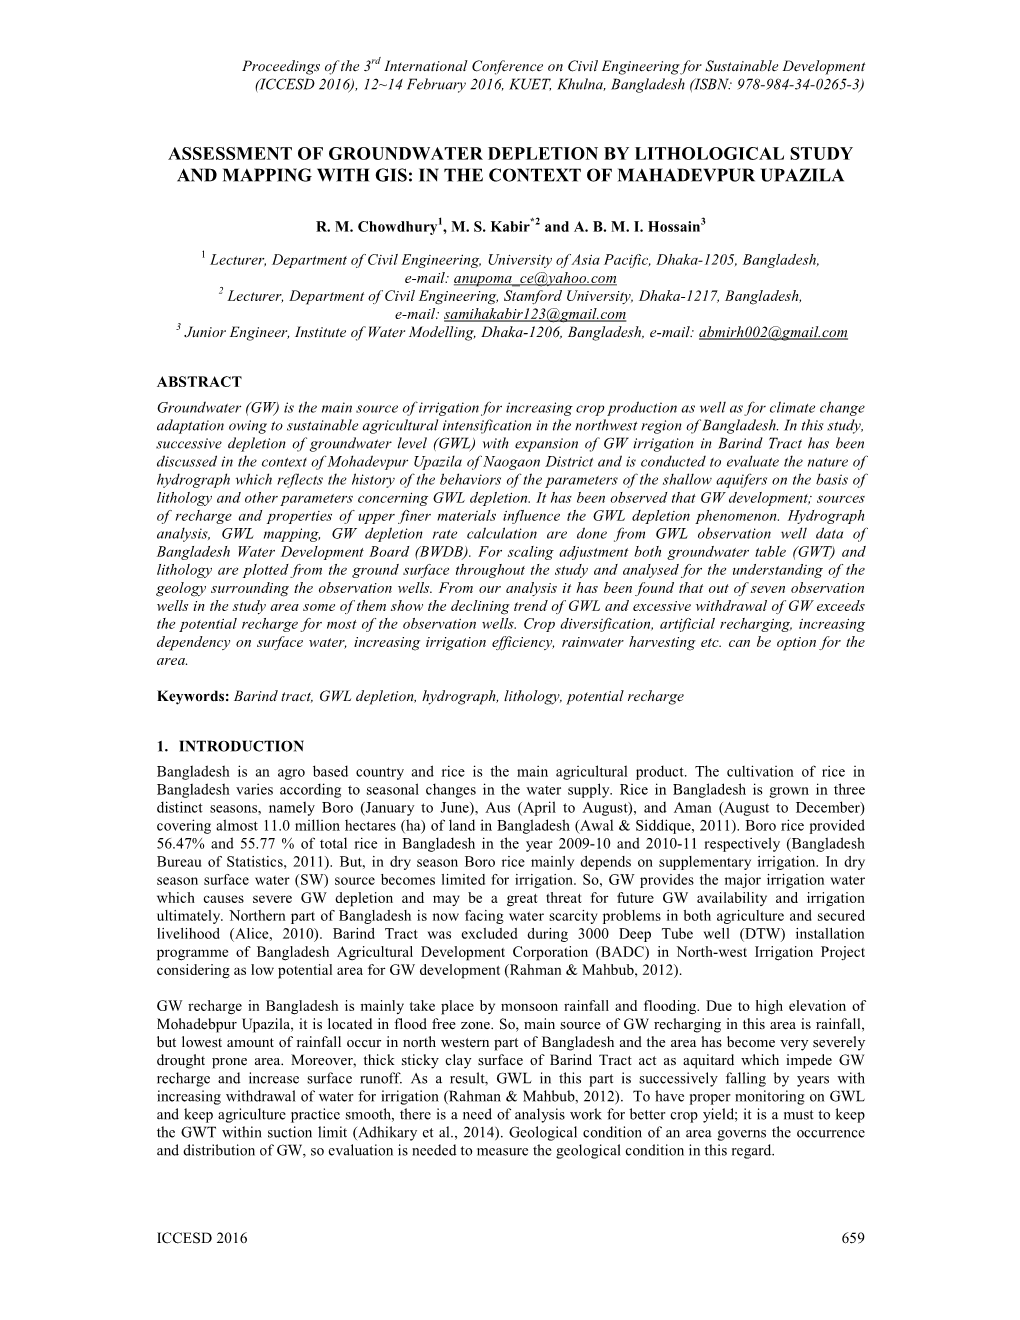 Assessment of Groundwater Depletion by Lithological Study and Mapping with Gis: in the Context of Mahadevpur Upazila